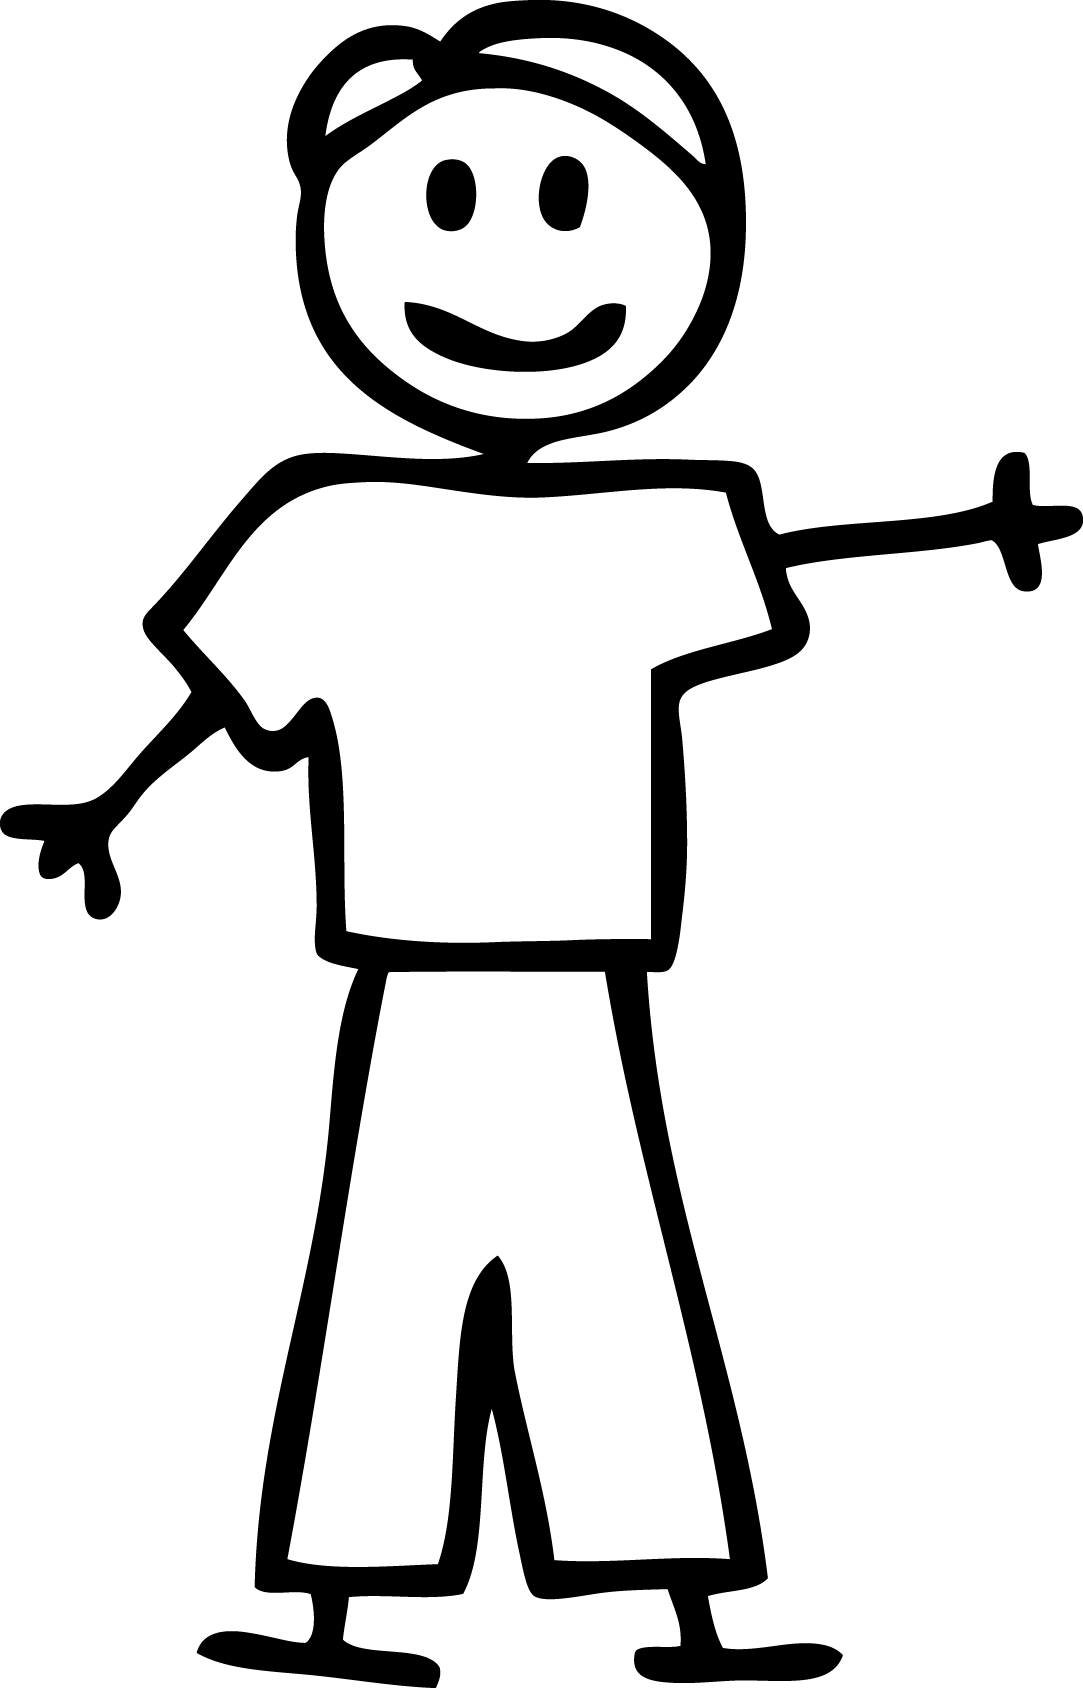 Stick People Images